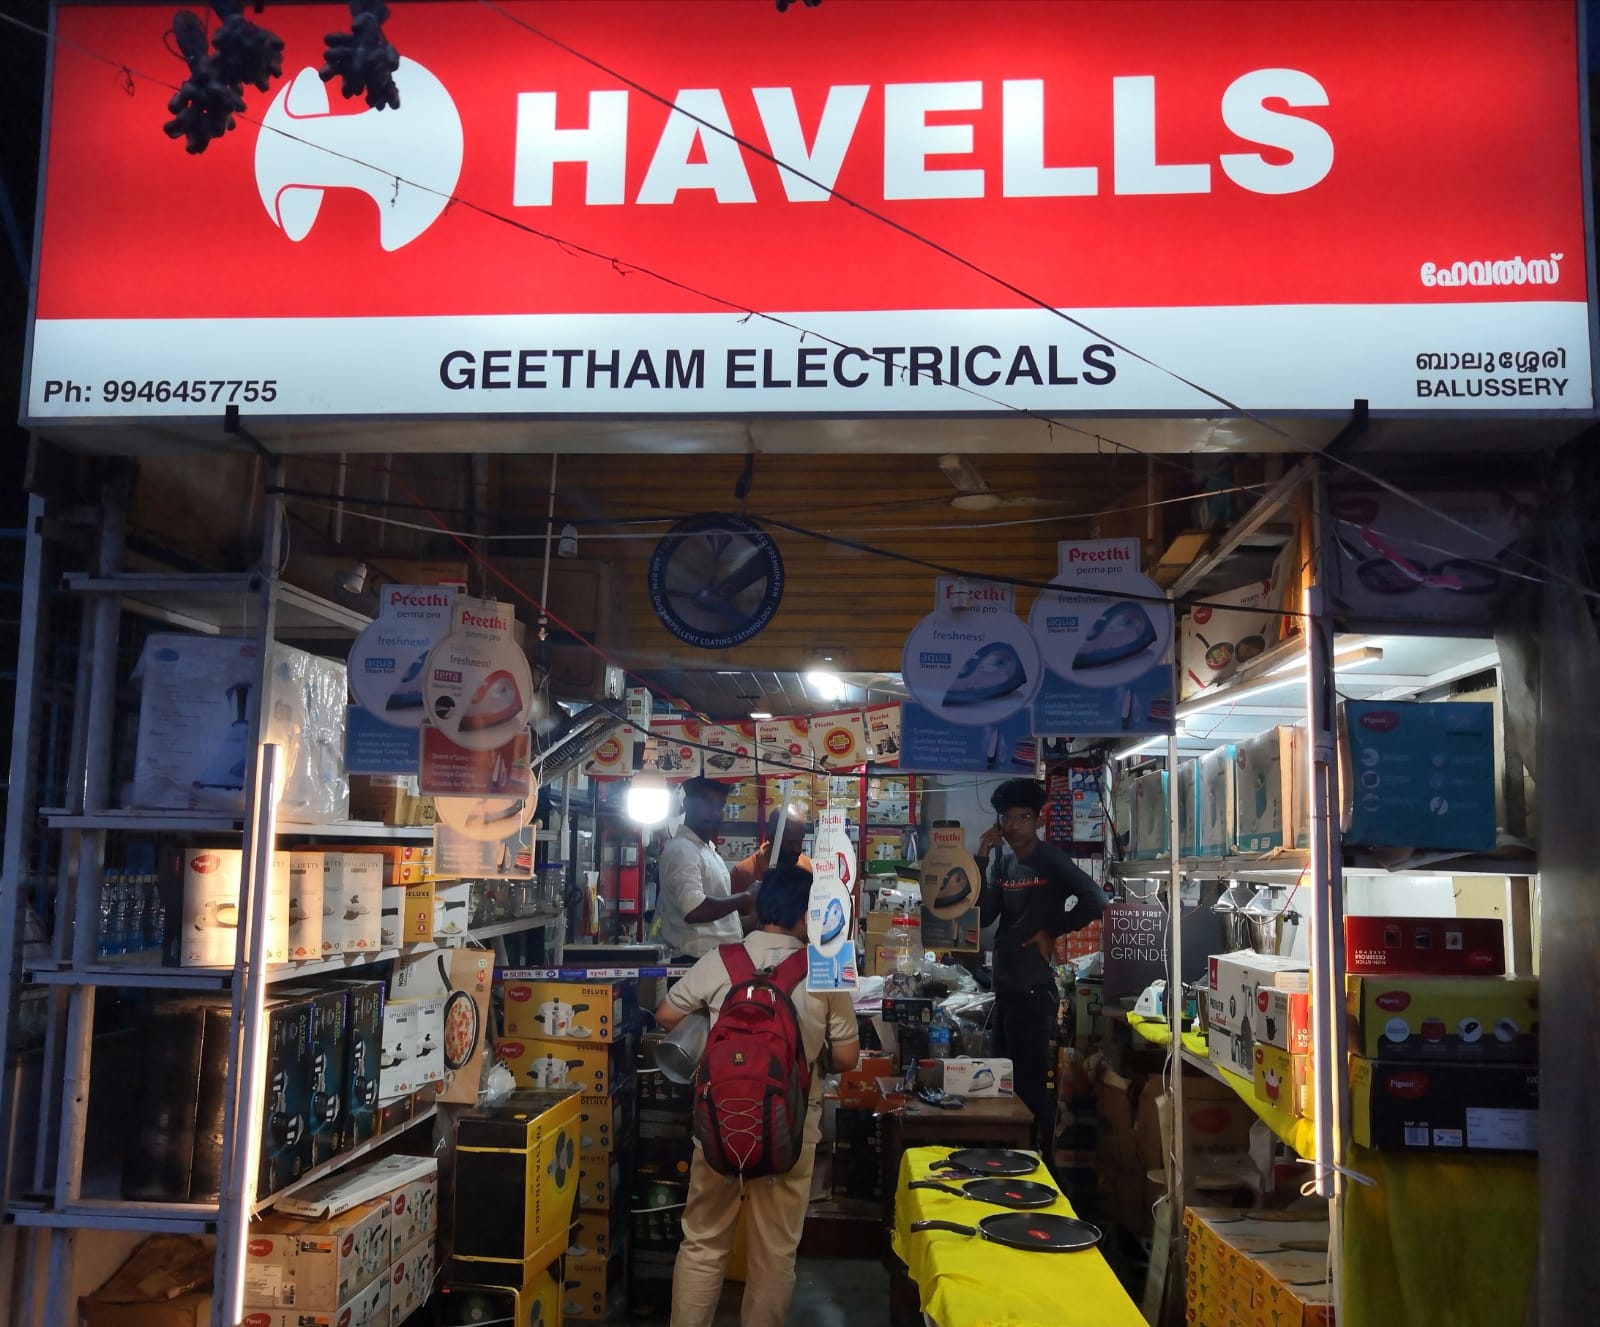 Geetham Electricals